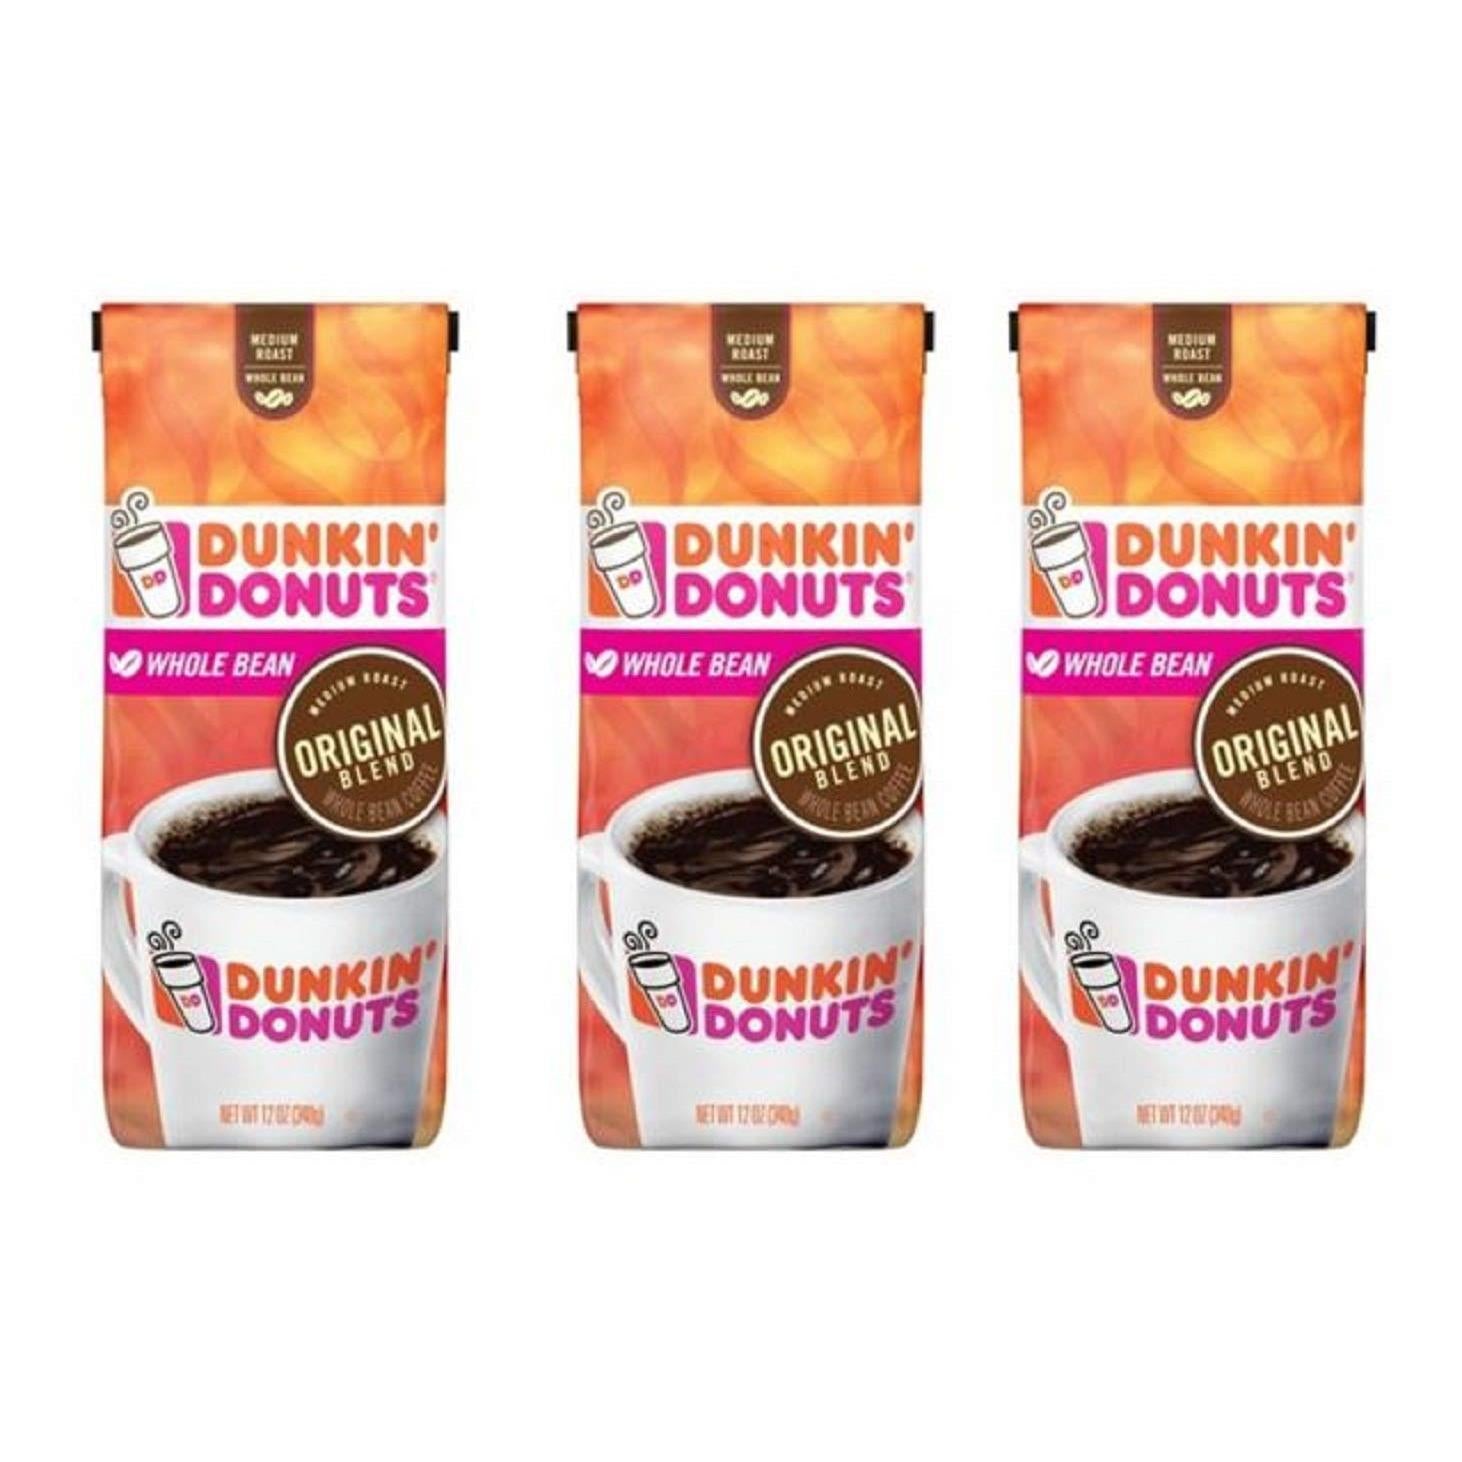 Dunkin' Donuts Original Blend Whole Bean Coffee, 12 oz. (PACK of 3)